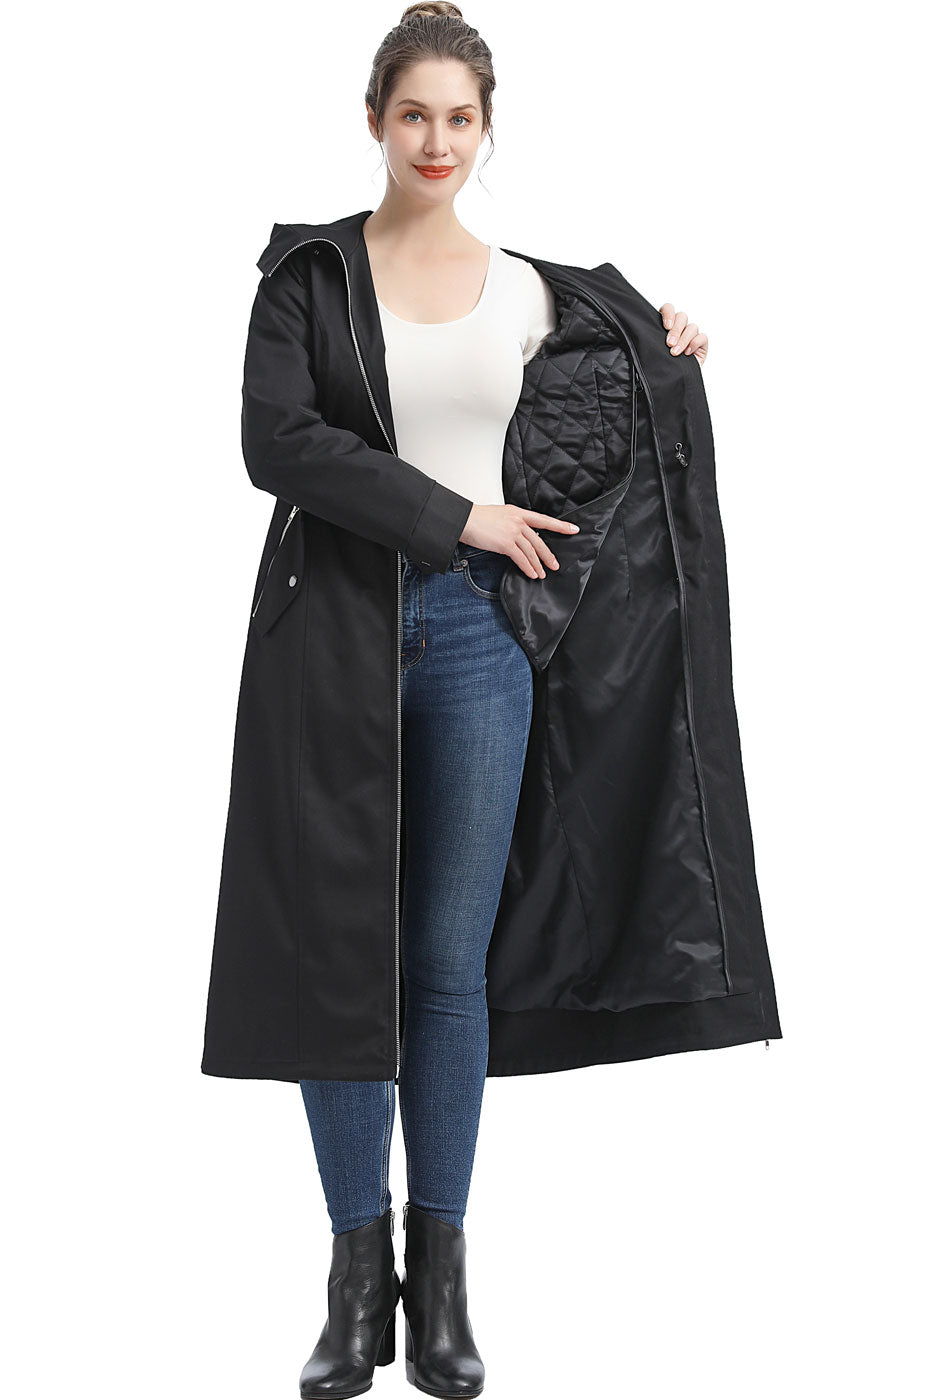 BGSD Women Zip-Out Lined Hooded Long Raincoat